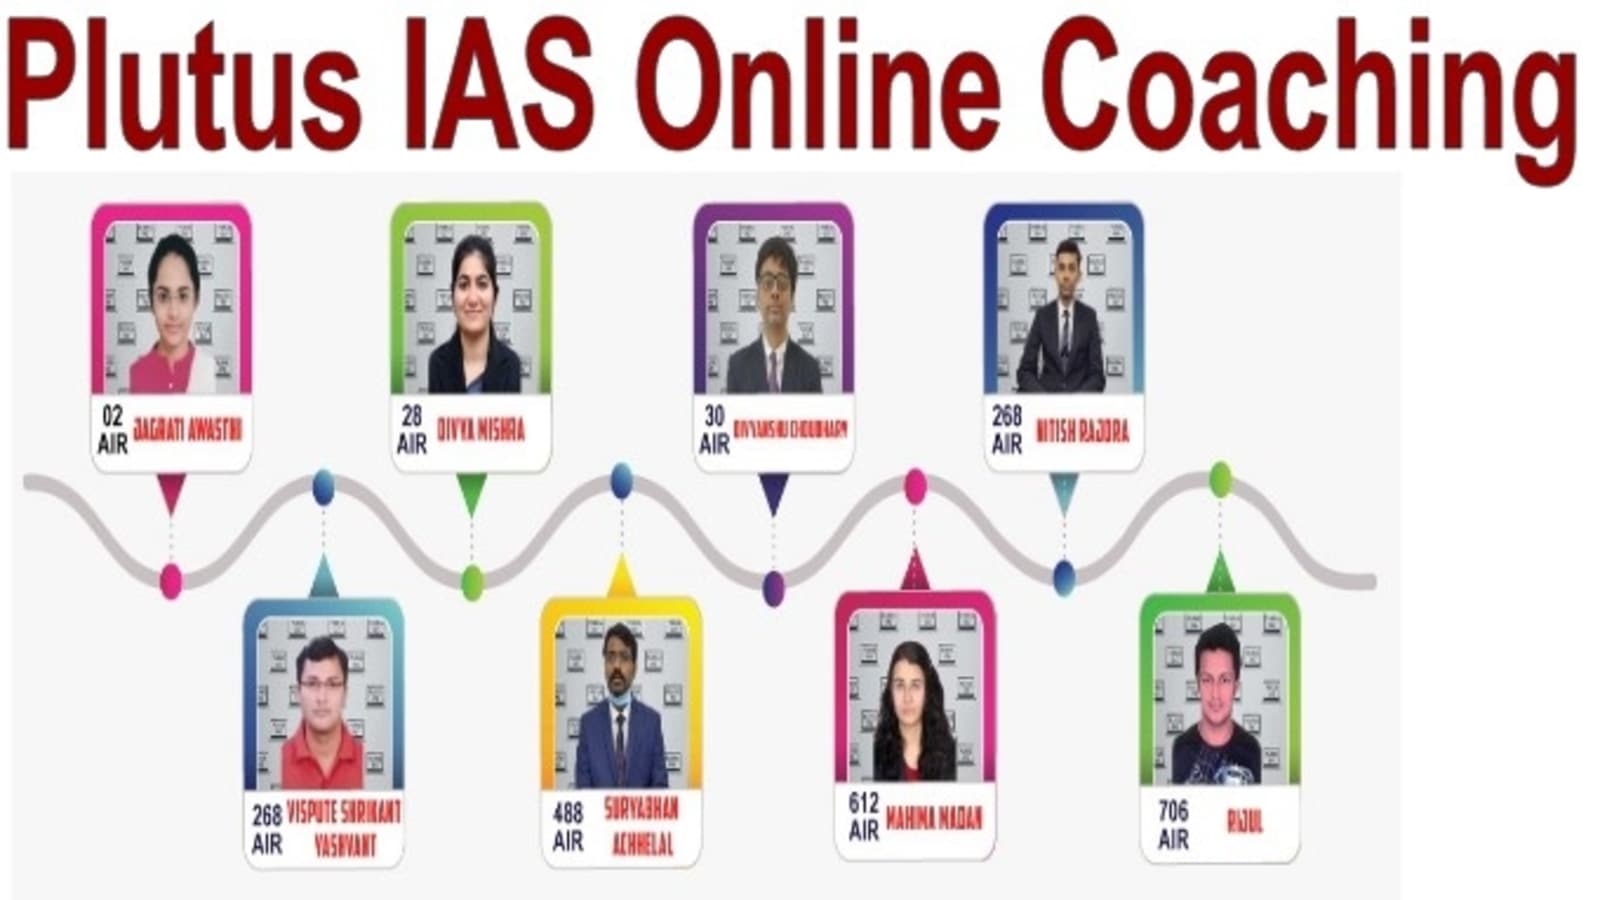 Plutus IAS Online Coaching Past Year Results